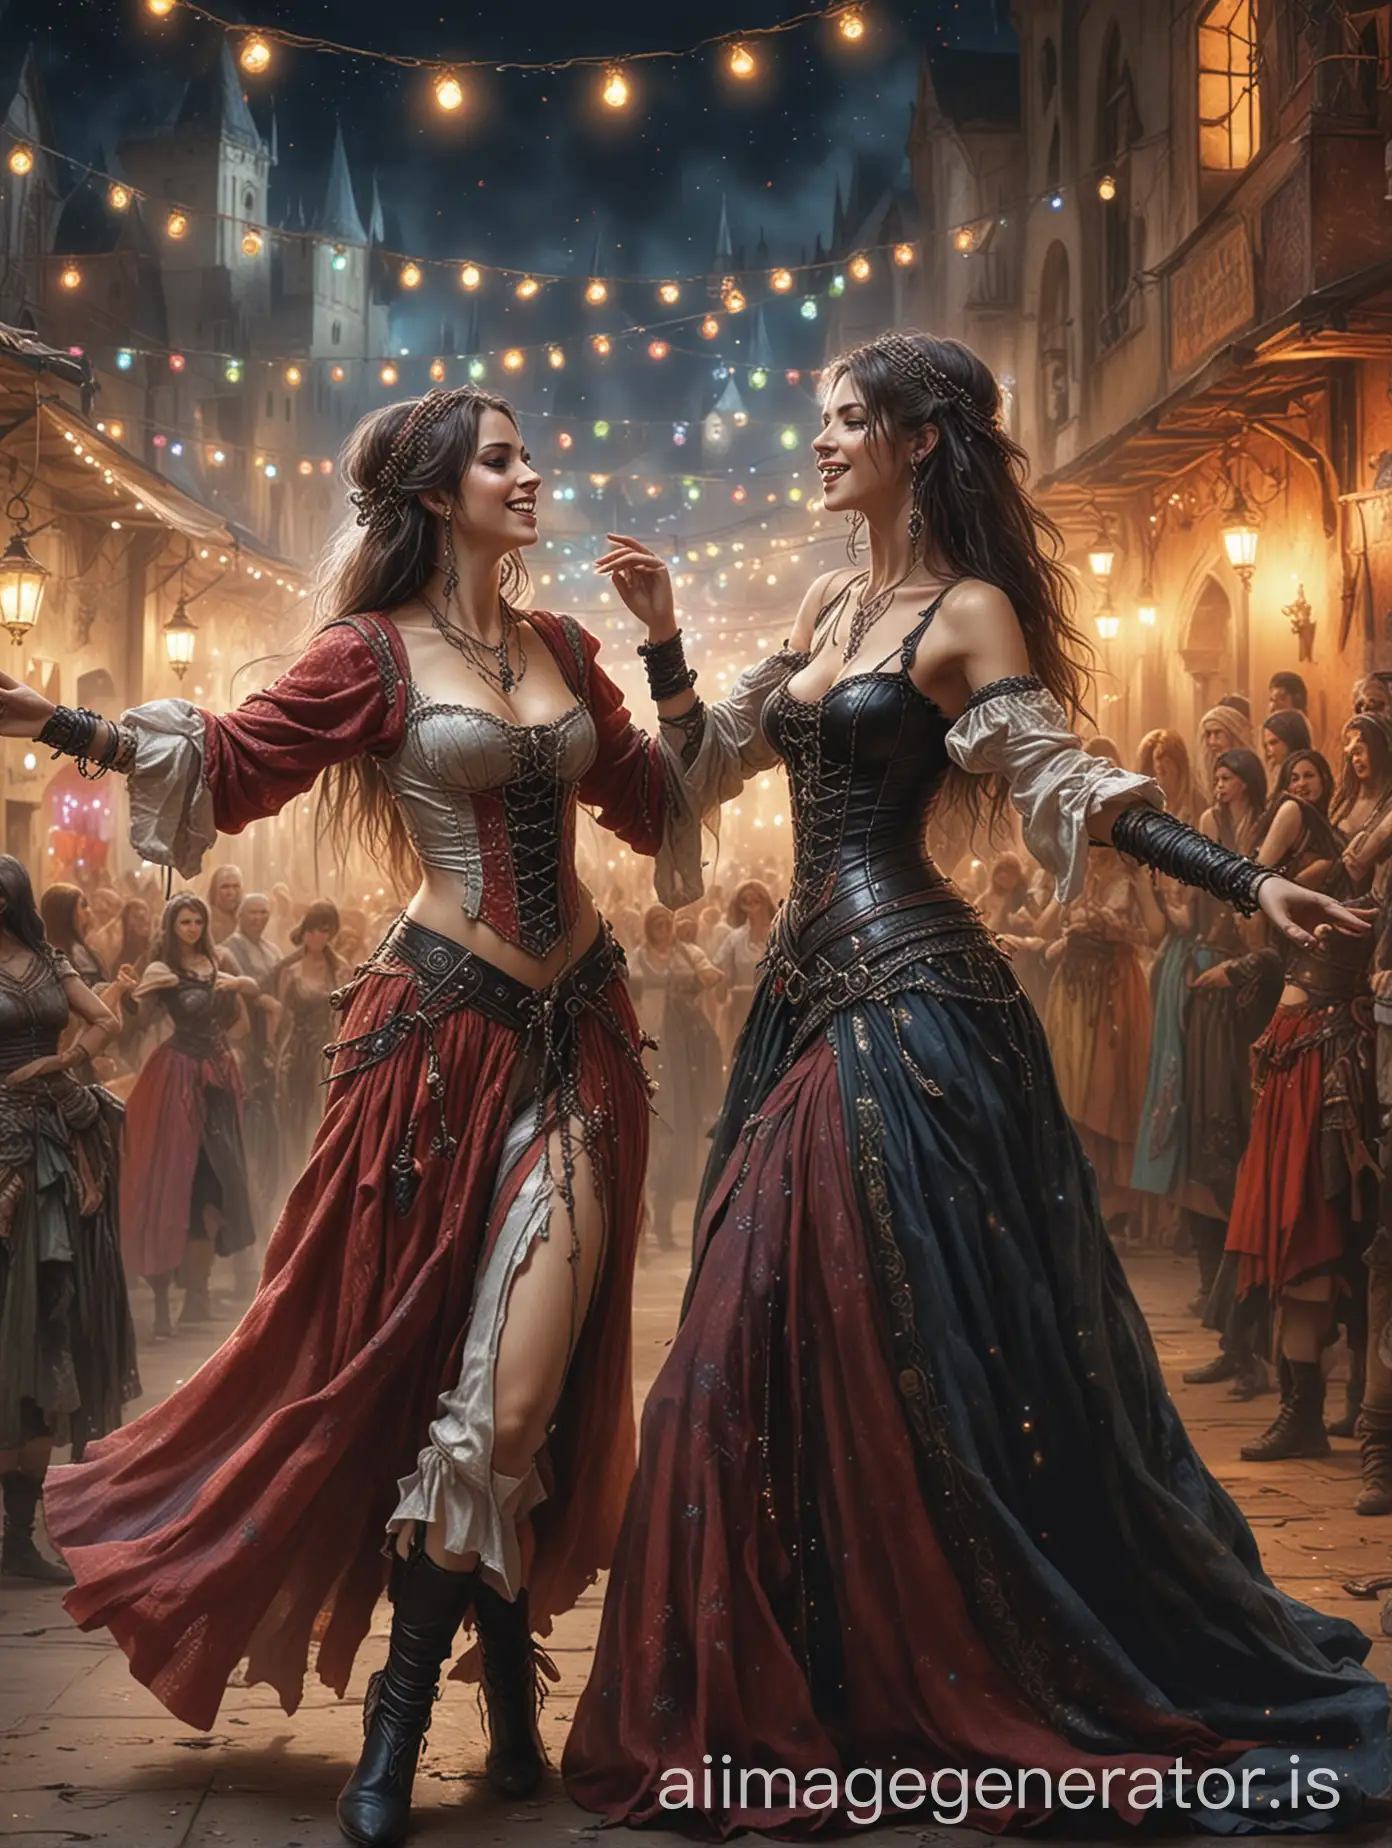 luis royo art style, Two women dancing and enjoying live music at a festival, wearing medieval clothes, surrounded by colorful lights and a lively crowd, with joyful expressions and a sense of freedom